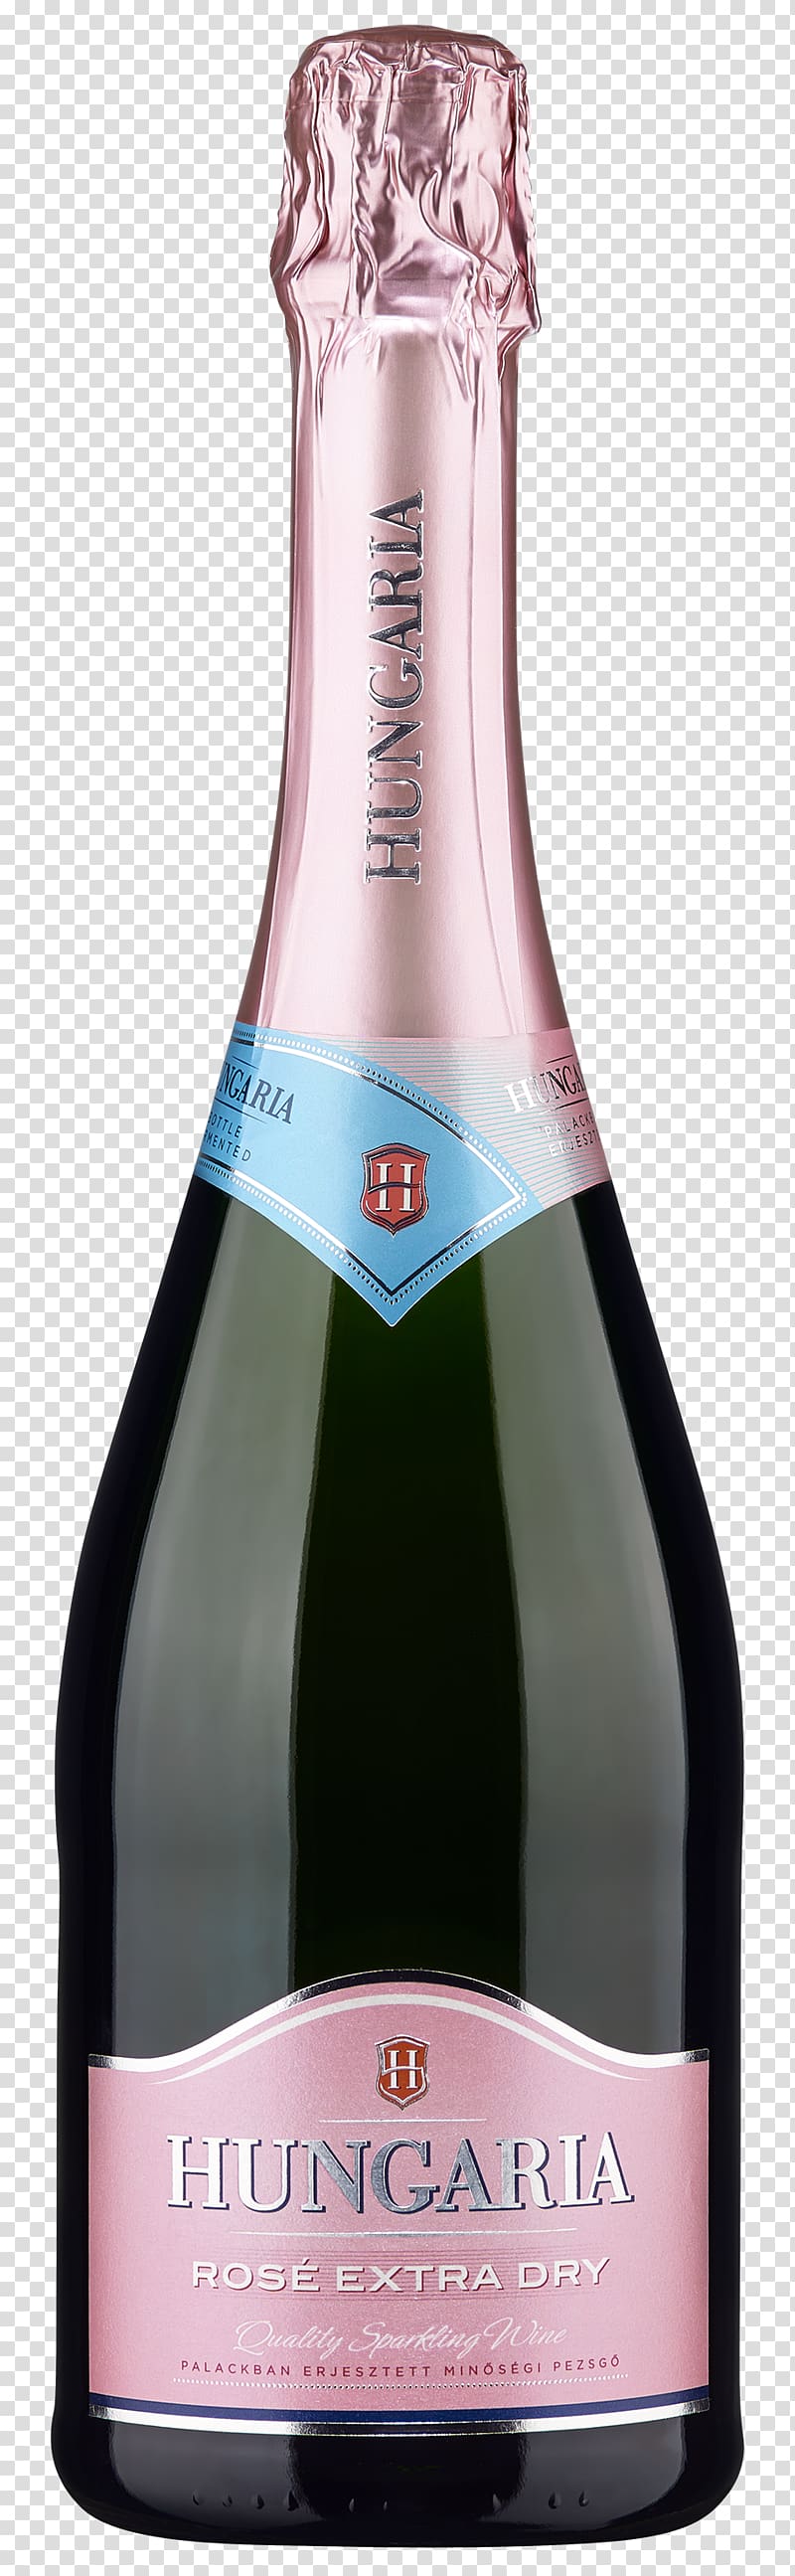 Champagne Sparkling wine Rosé Hungary, champagne transparent background PNG clipart